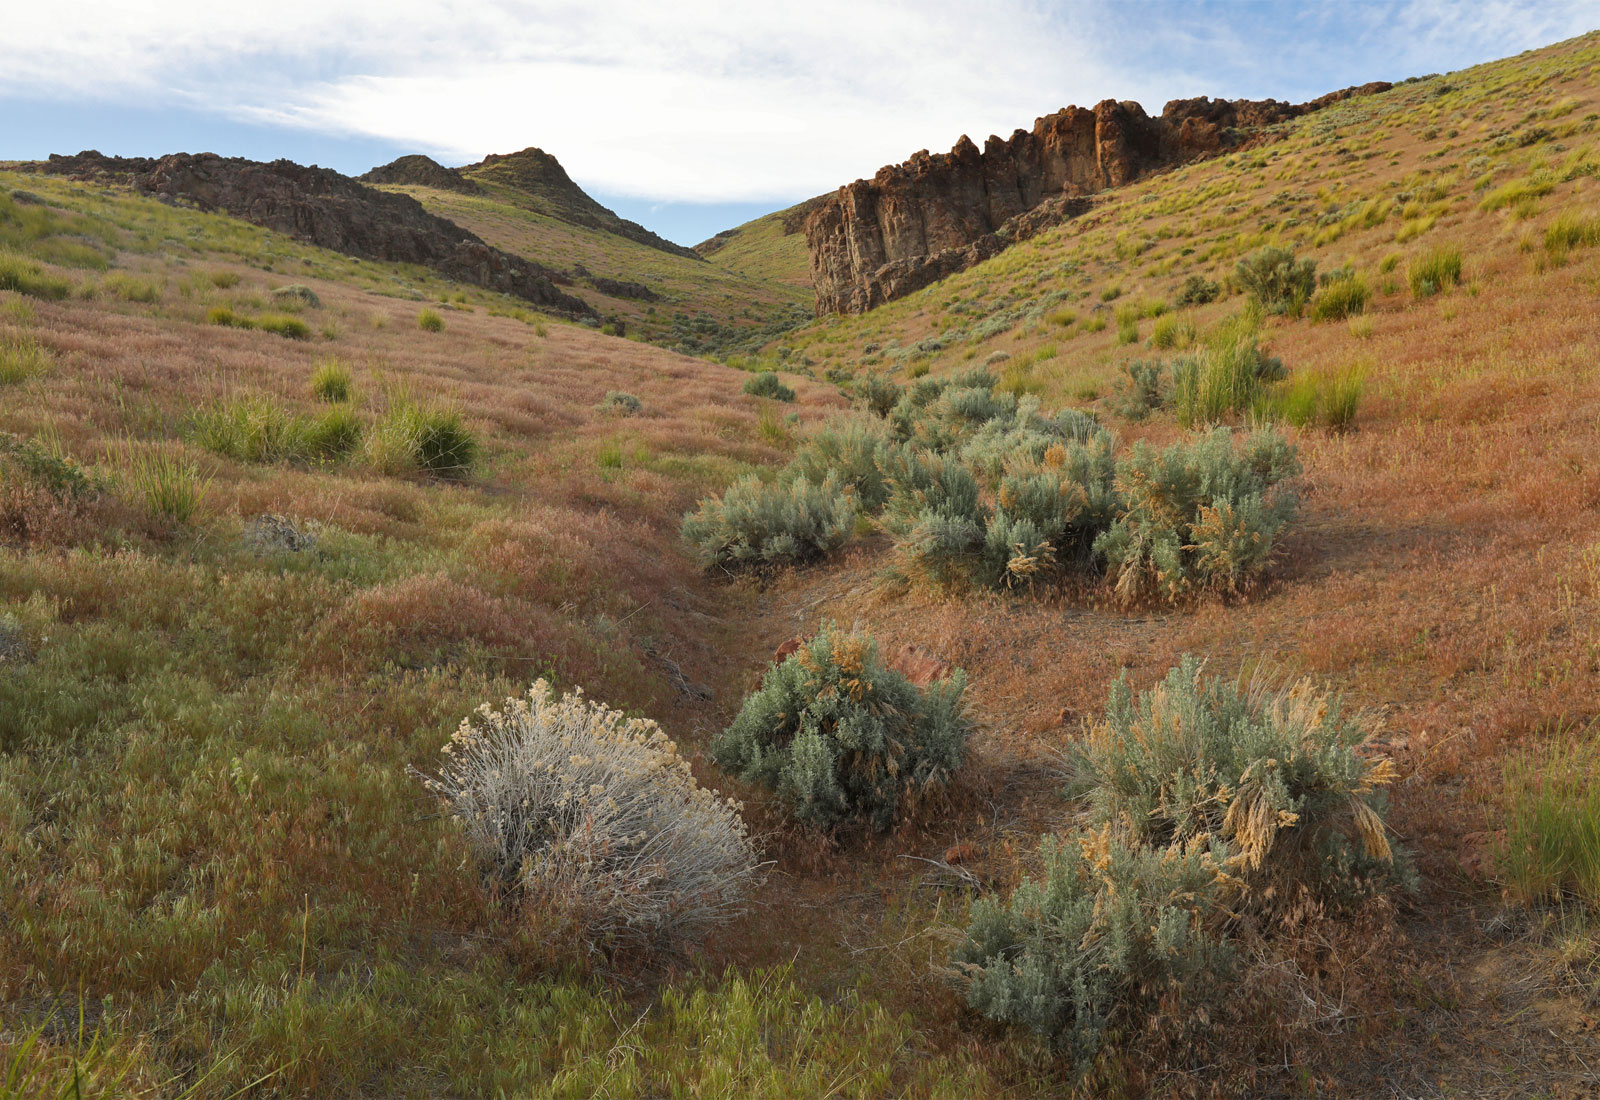 Rock formations, hills, and sagebrush in Thacker Pass, Nevada